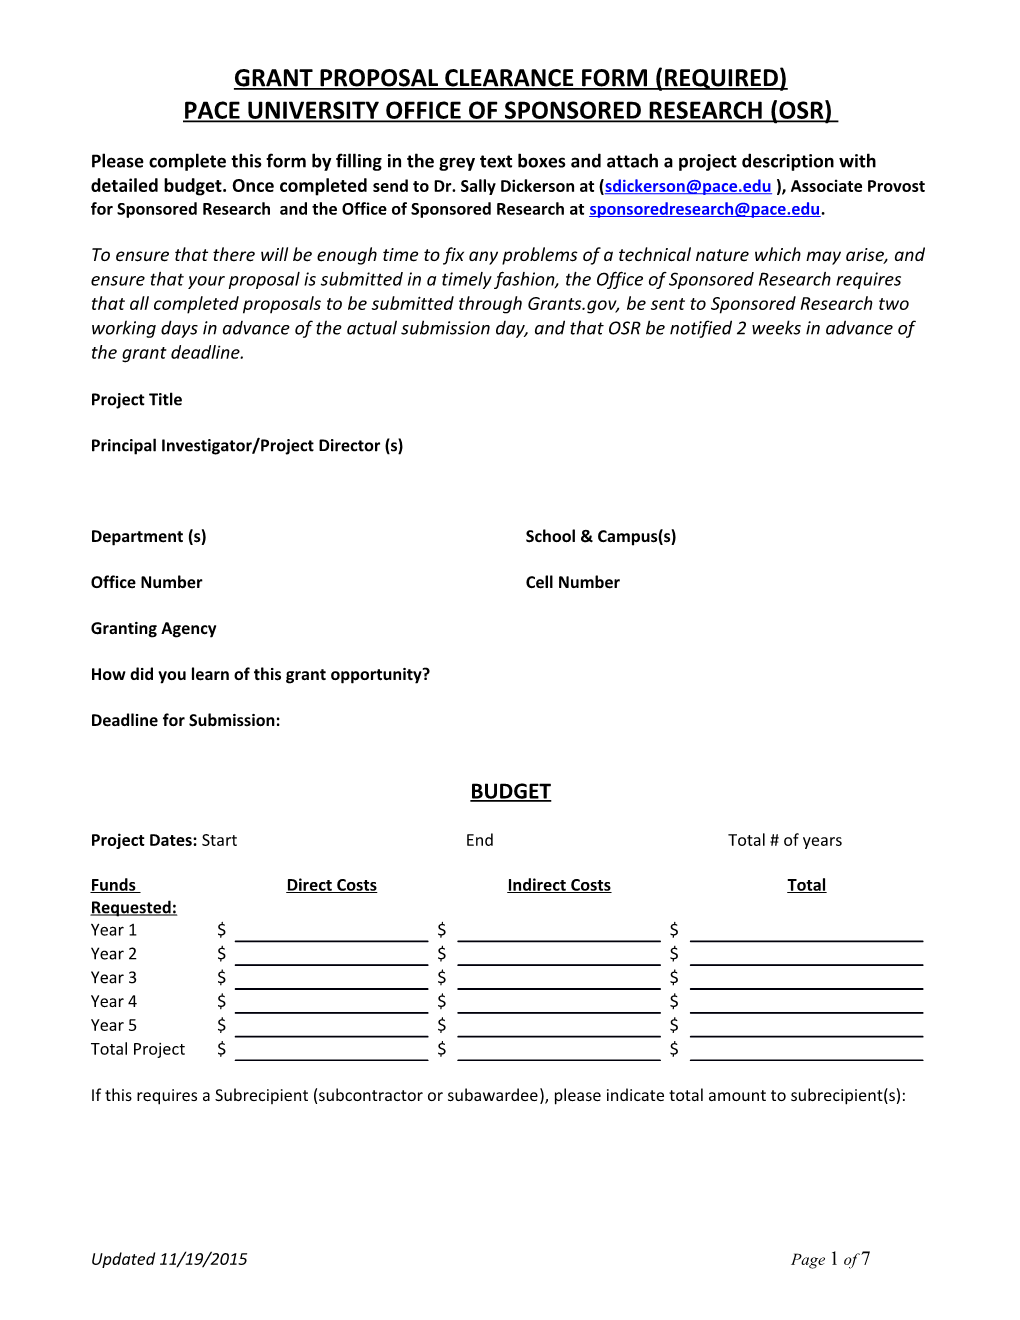 Grant Proposal Clearance Form (Required)